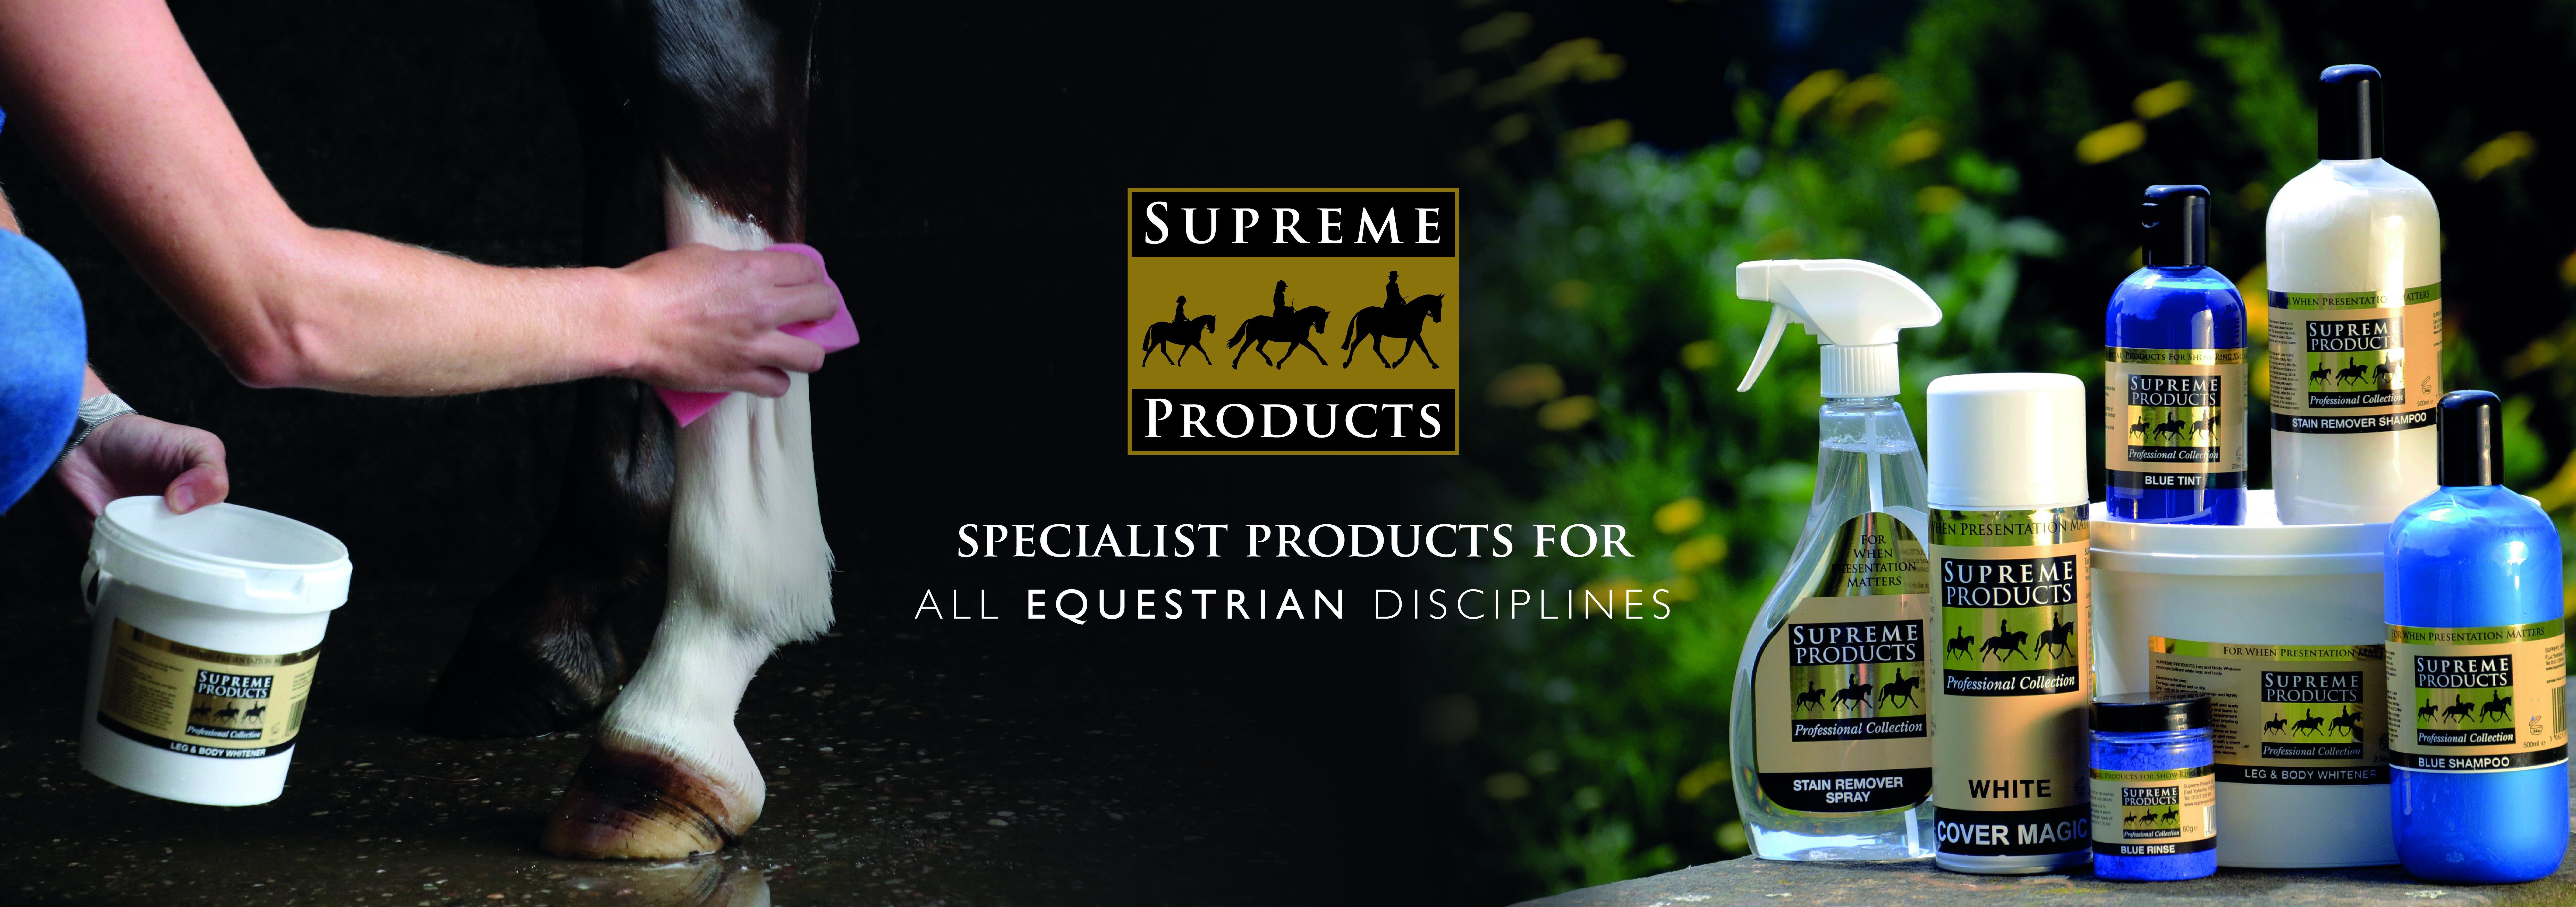 Supreme Products Homepage Brand Banner 21 - 01